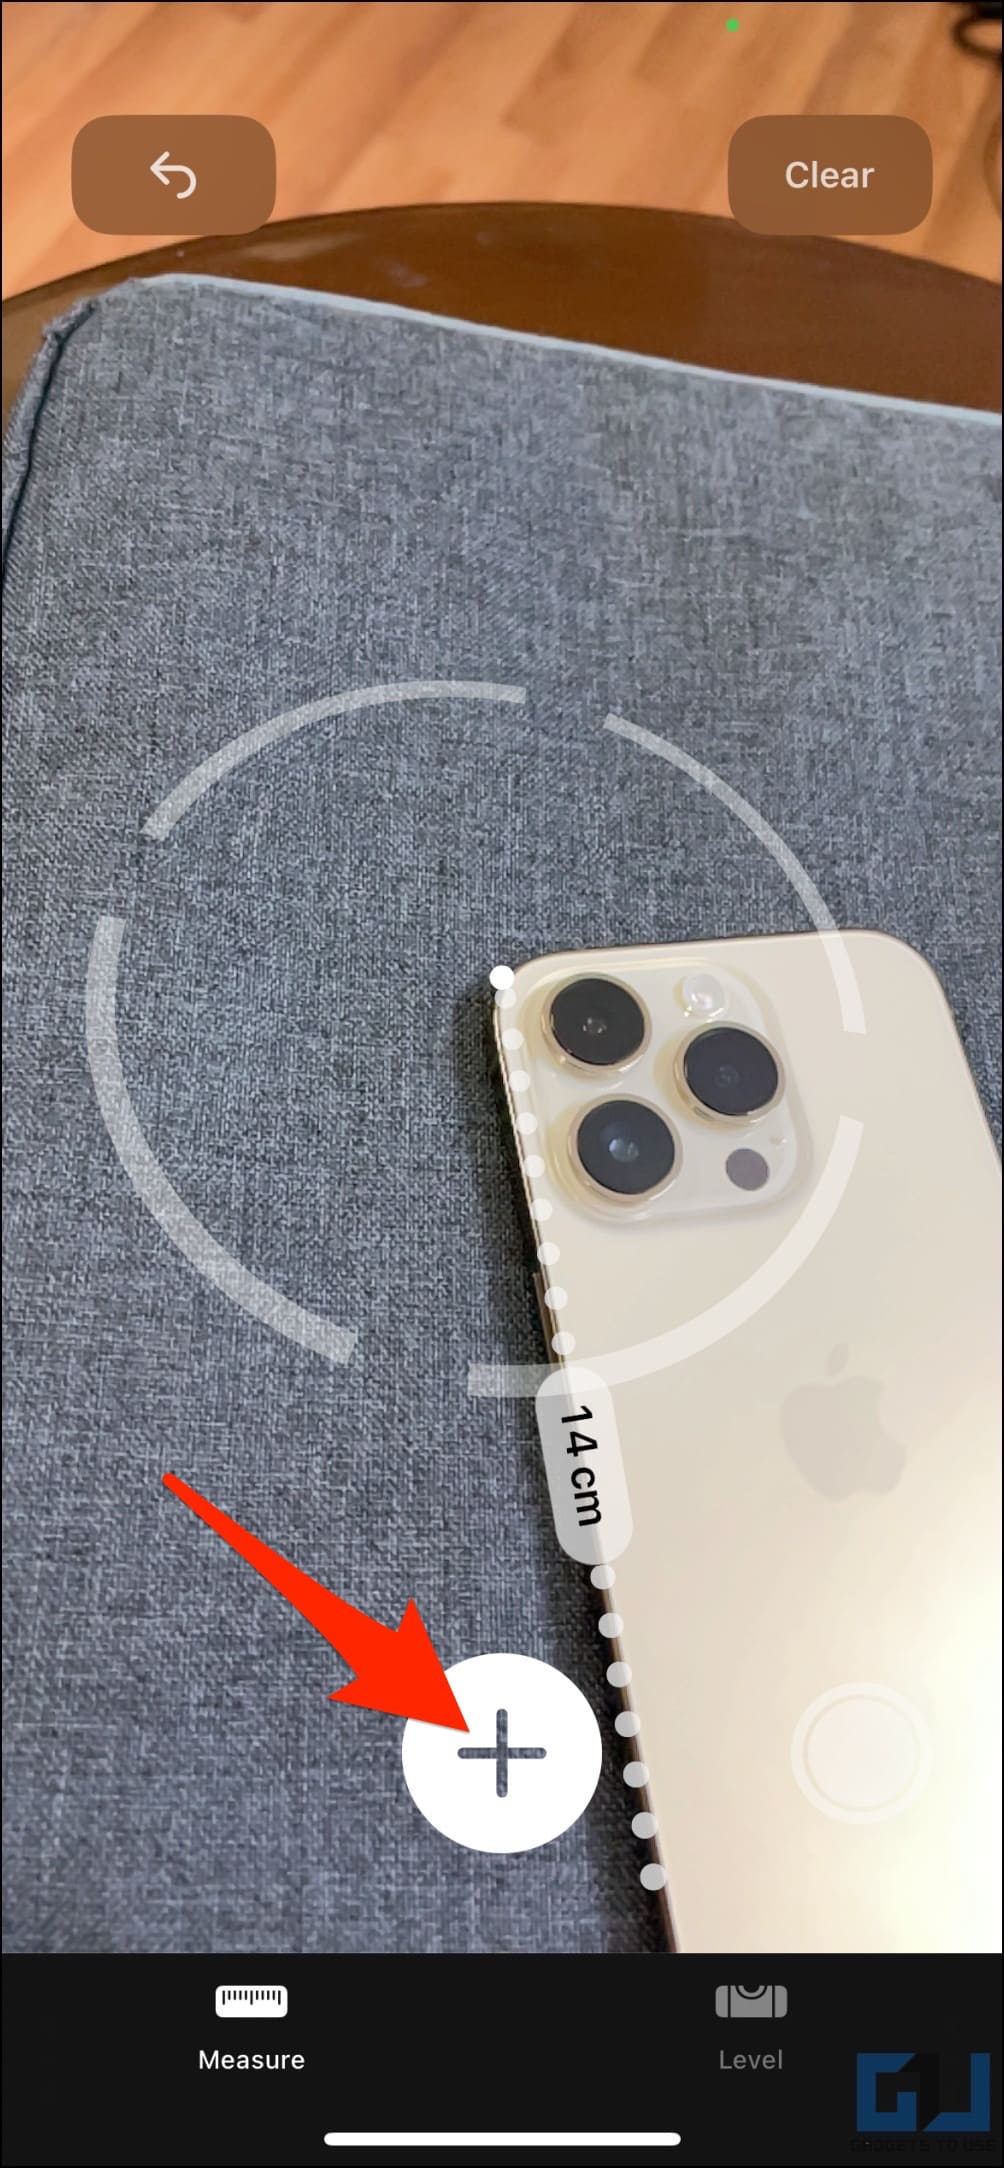 Measure Object Dimensions on iPhone